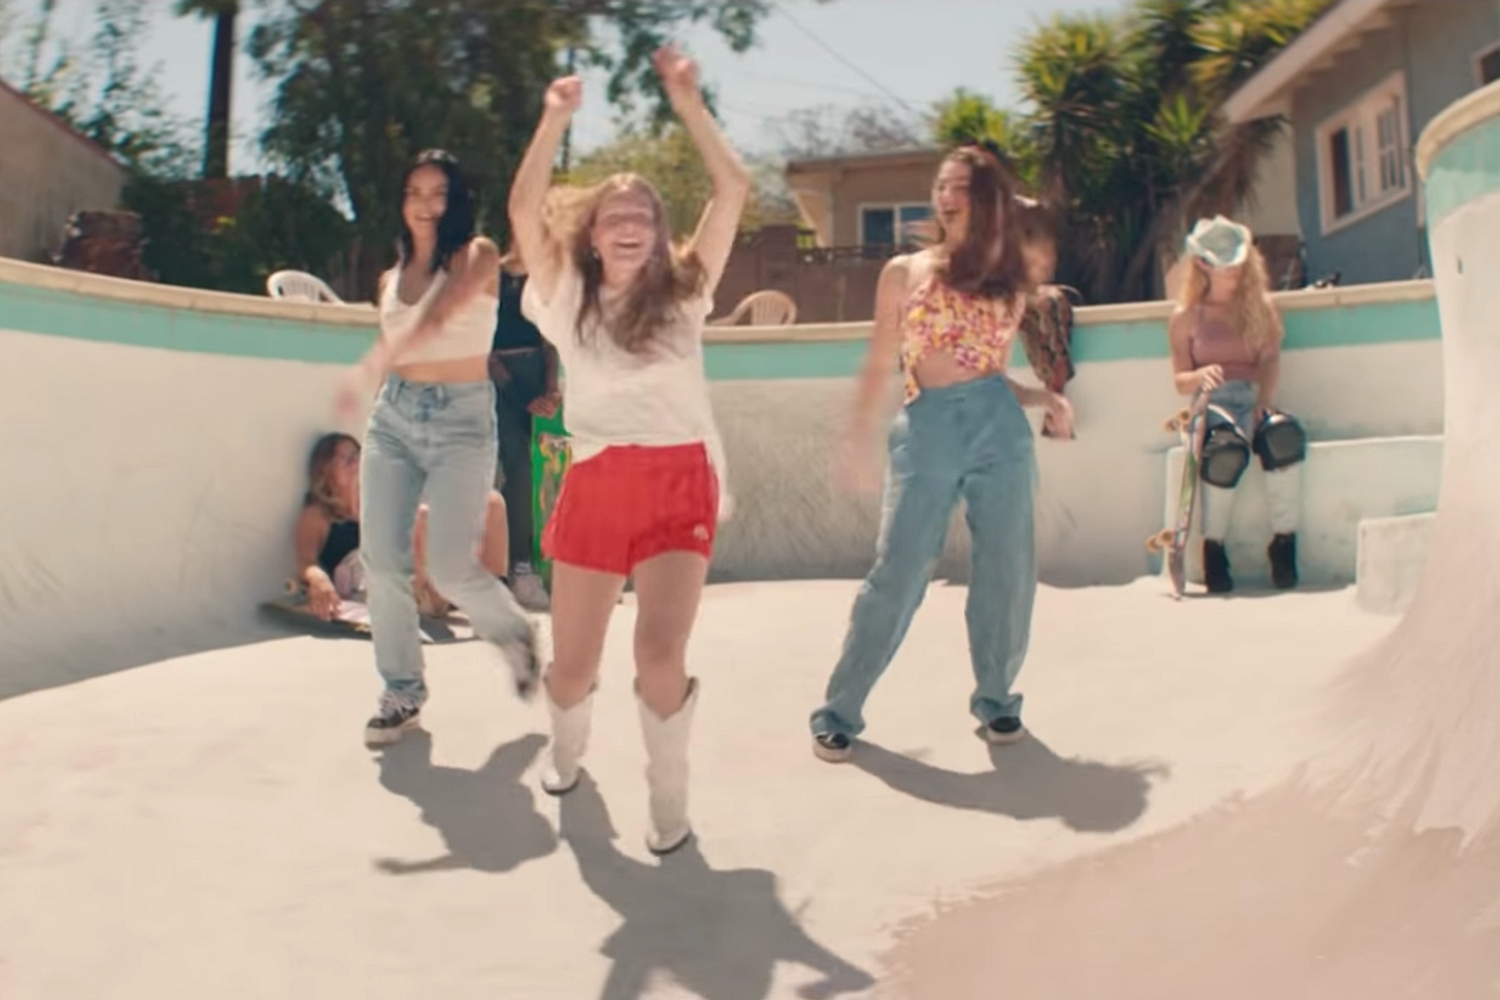 Maggie Rogers has fun in the sun in the video for ‘Give A Little’